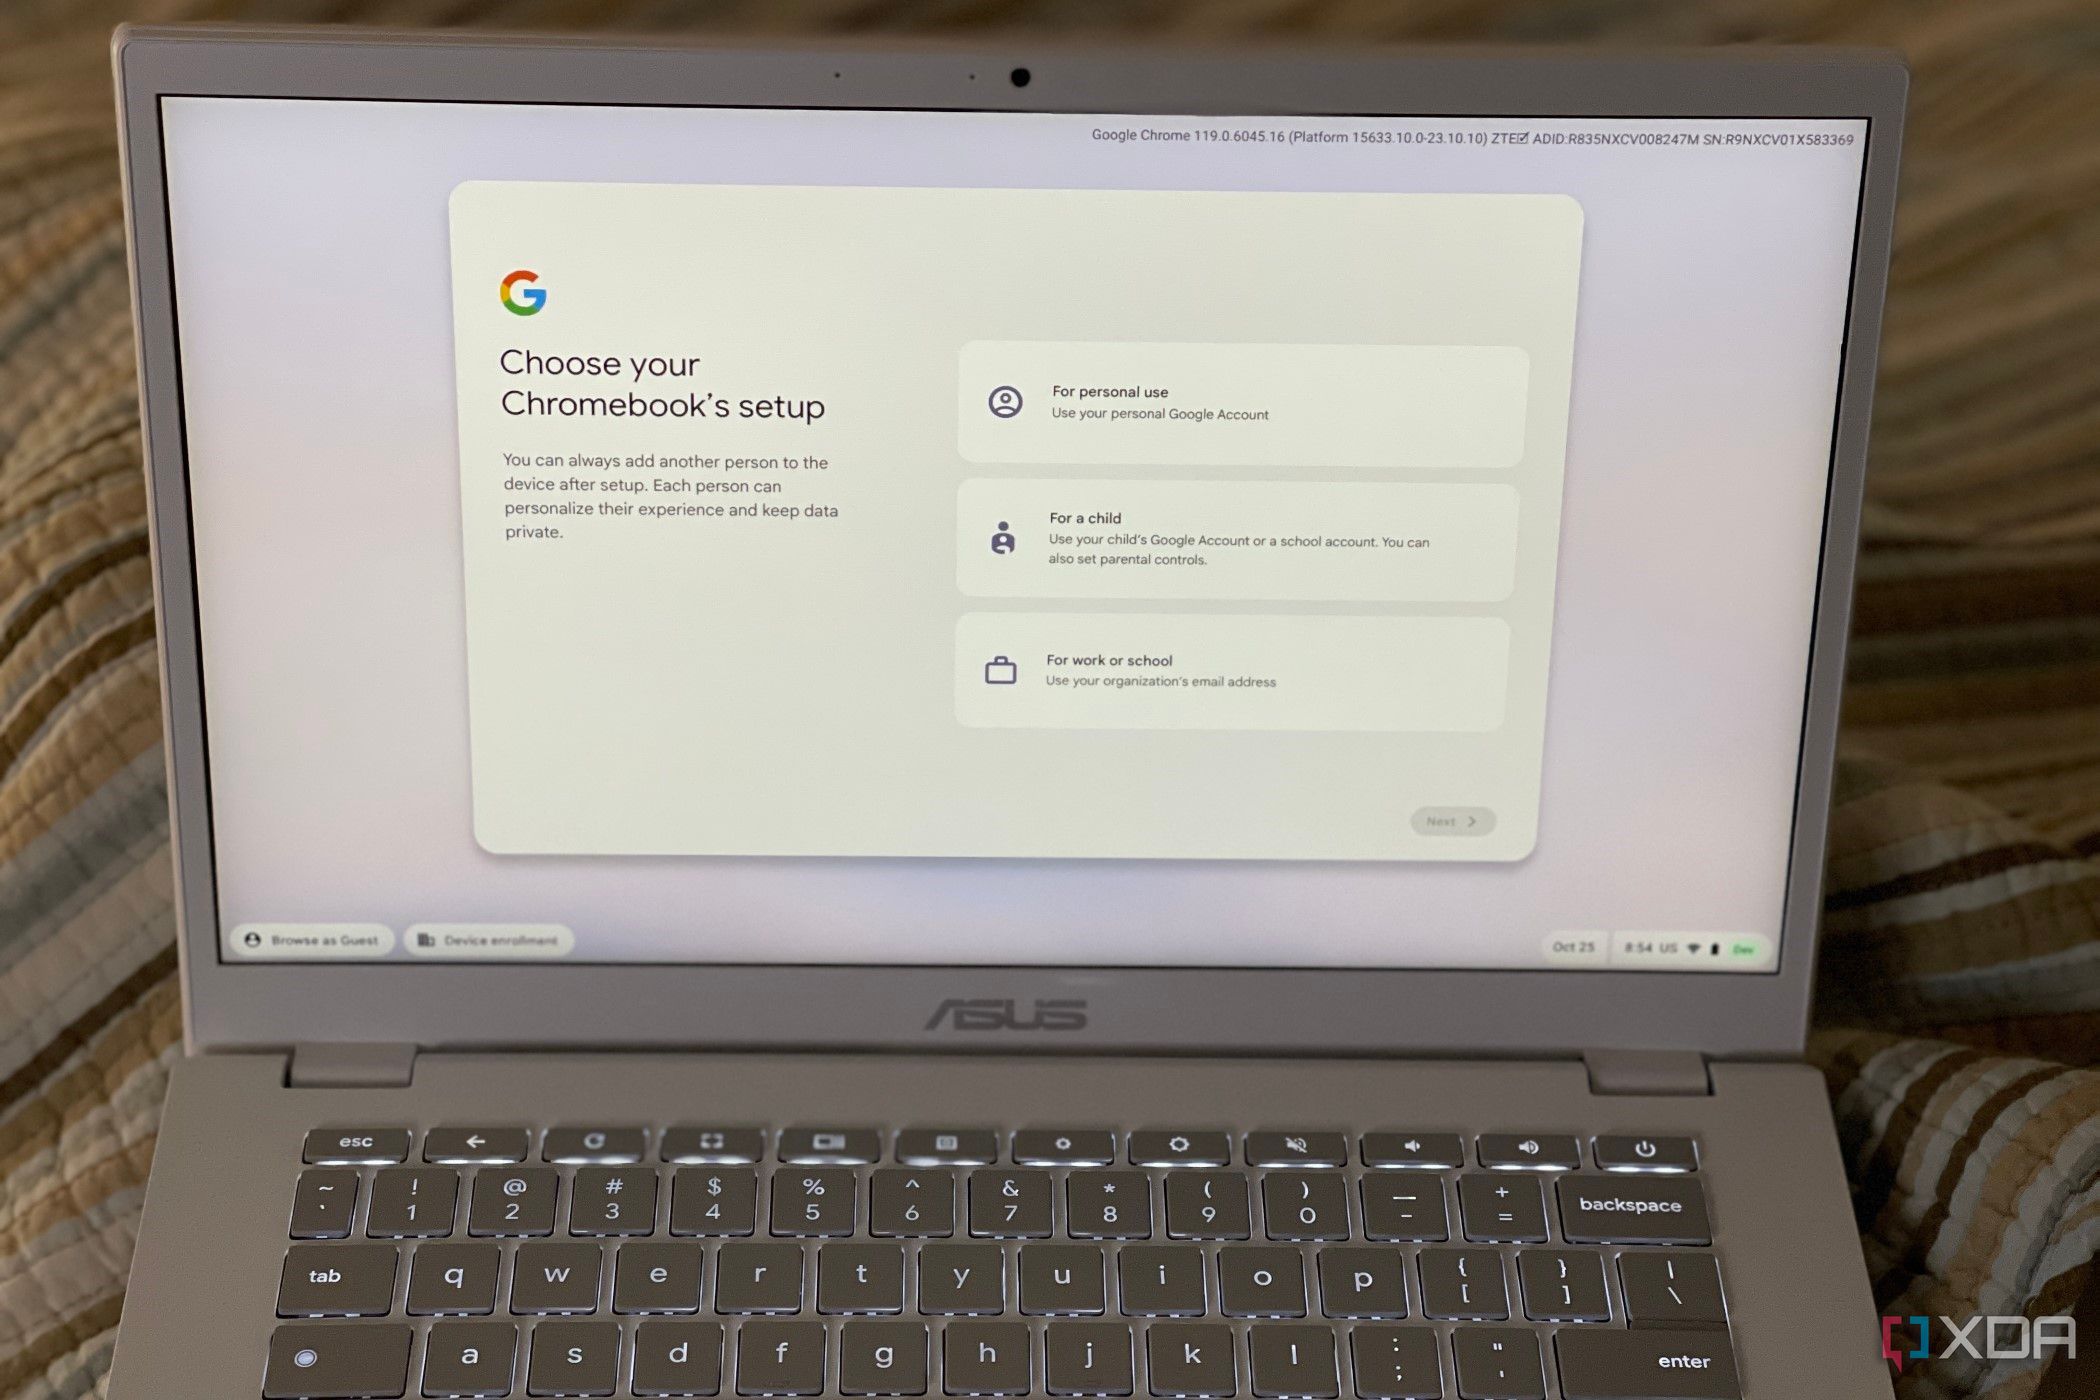 Choosing who is using a Chromebook